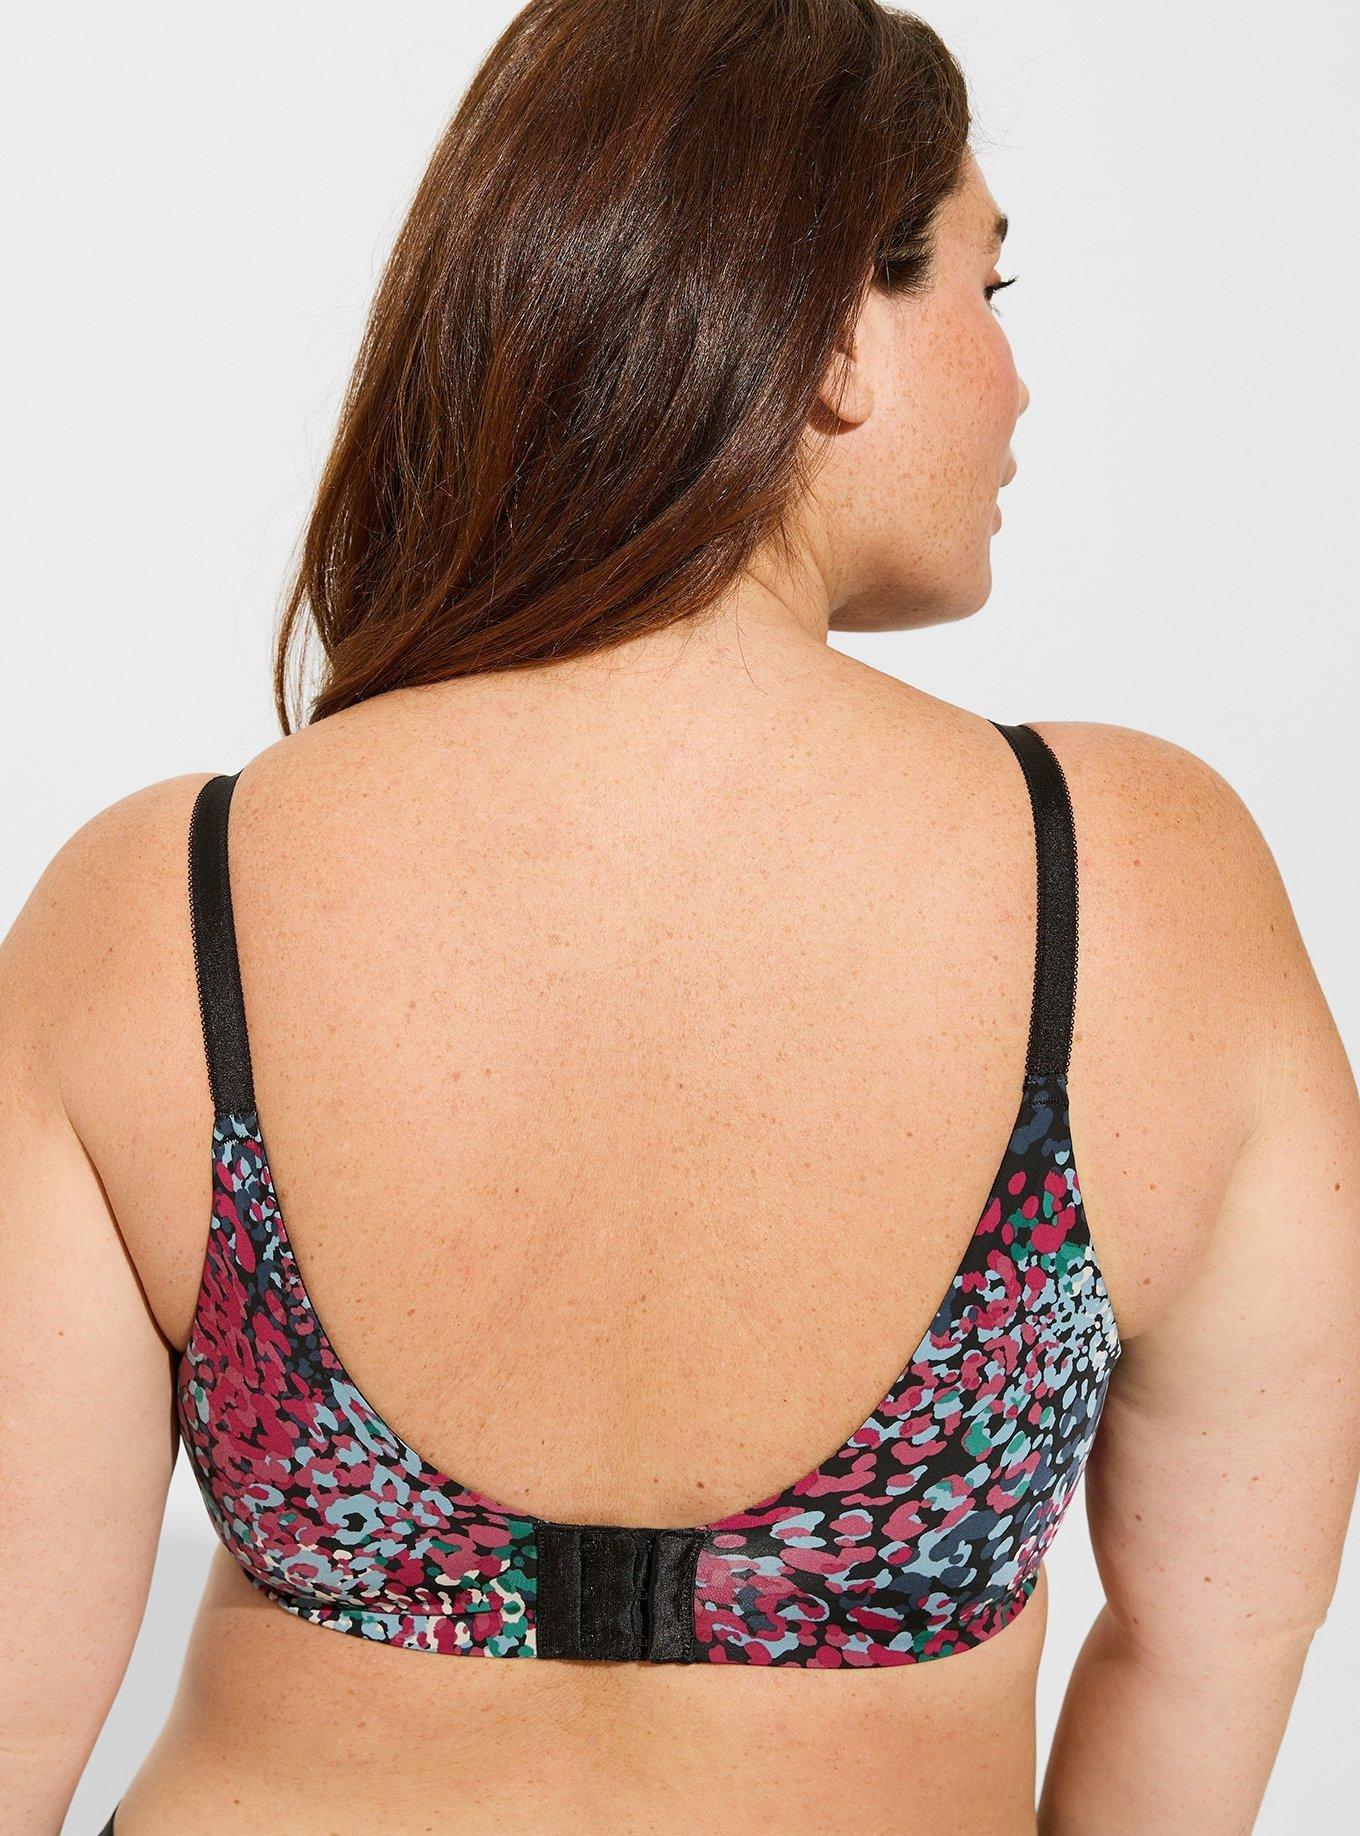 Outfitting Solution Bras 38D